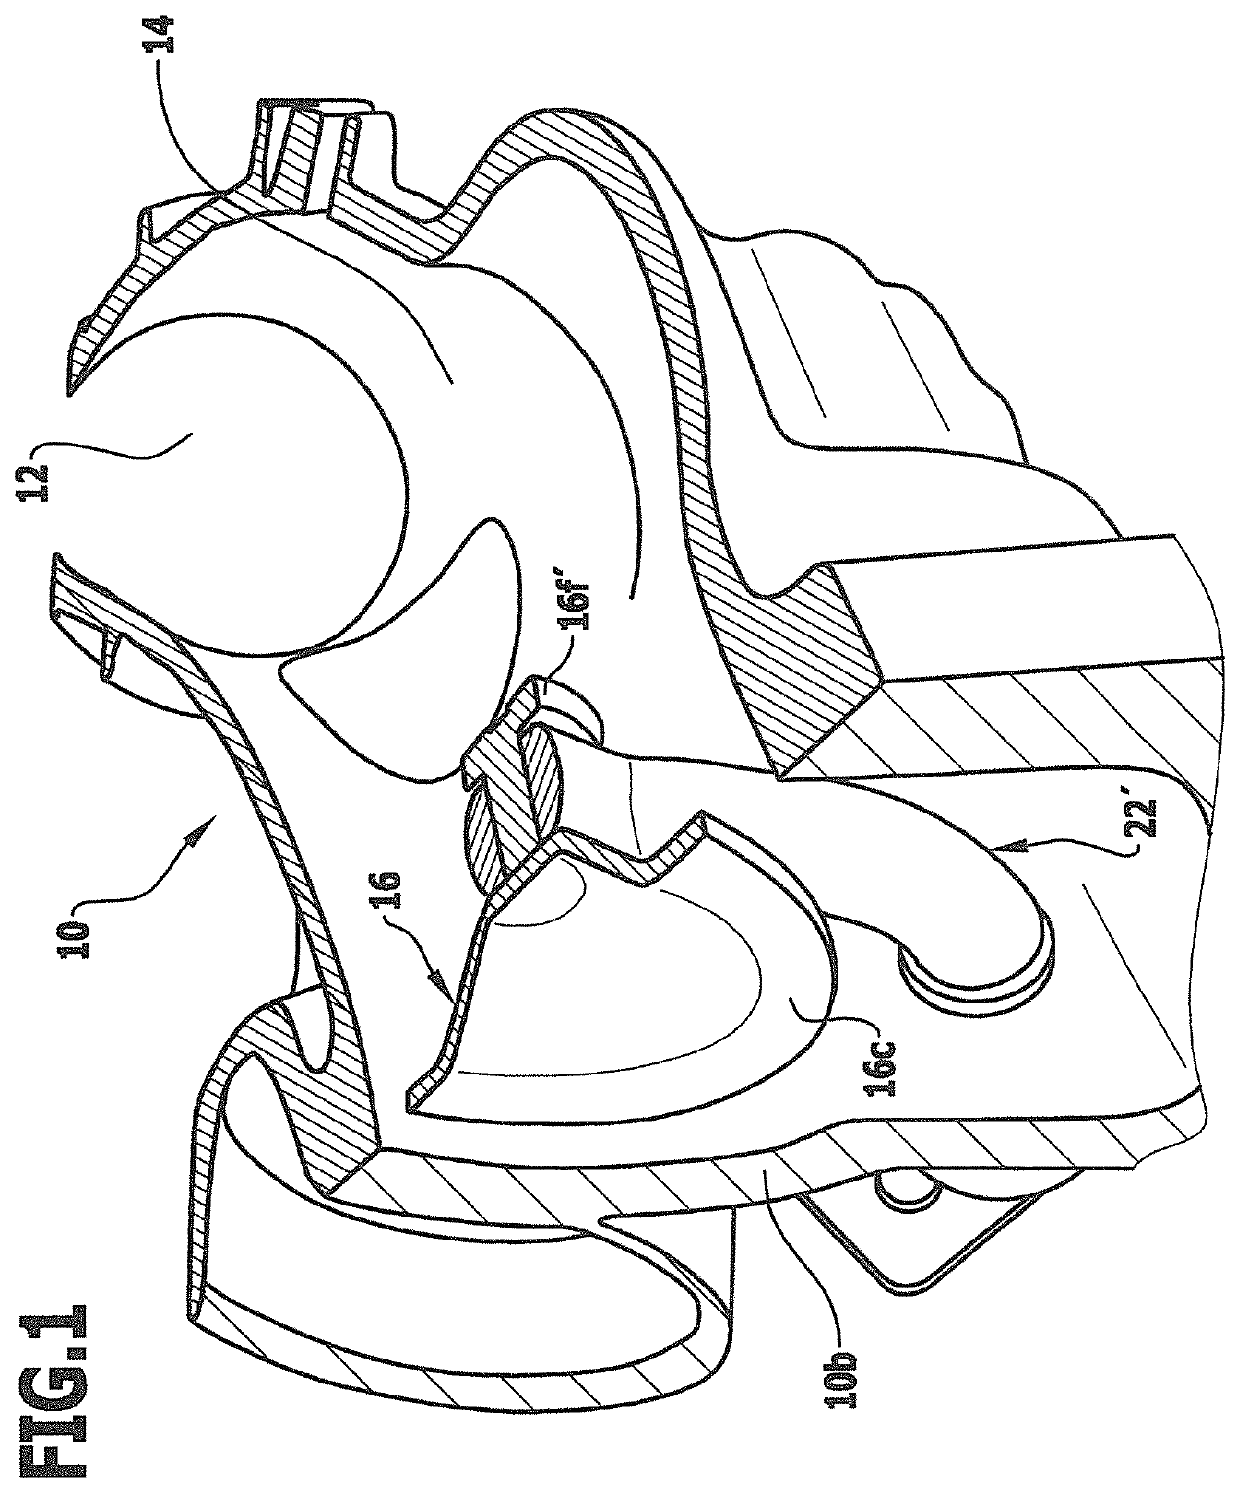 Valve device for a turbocharger